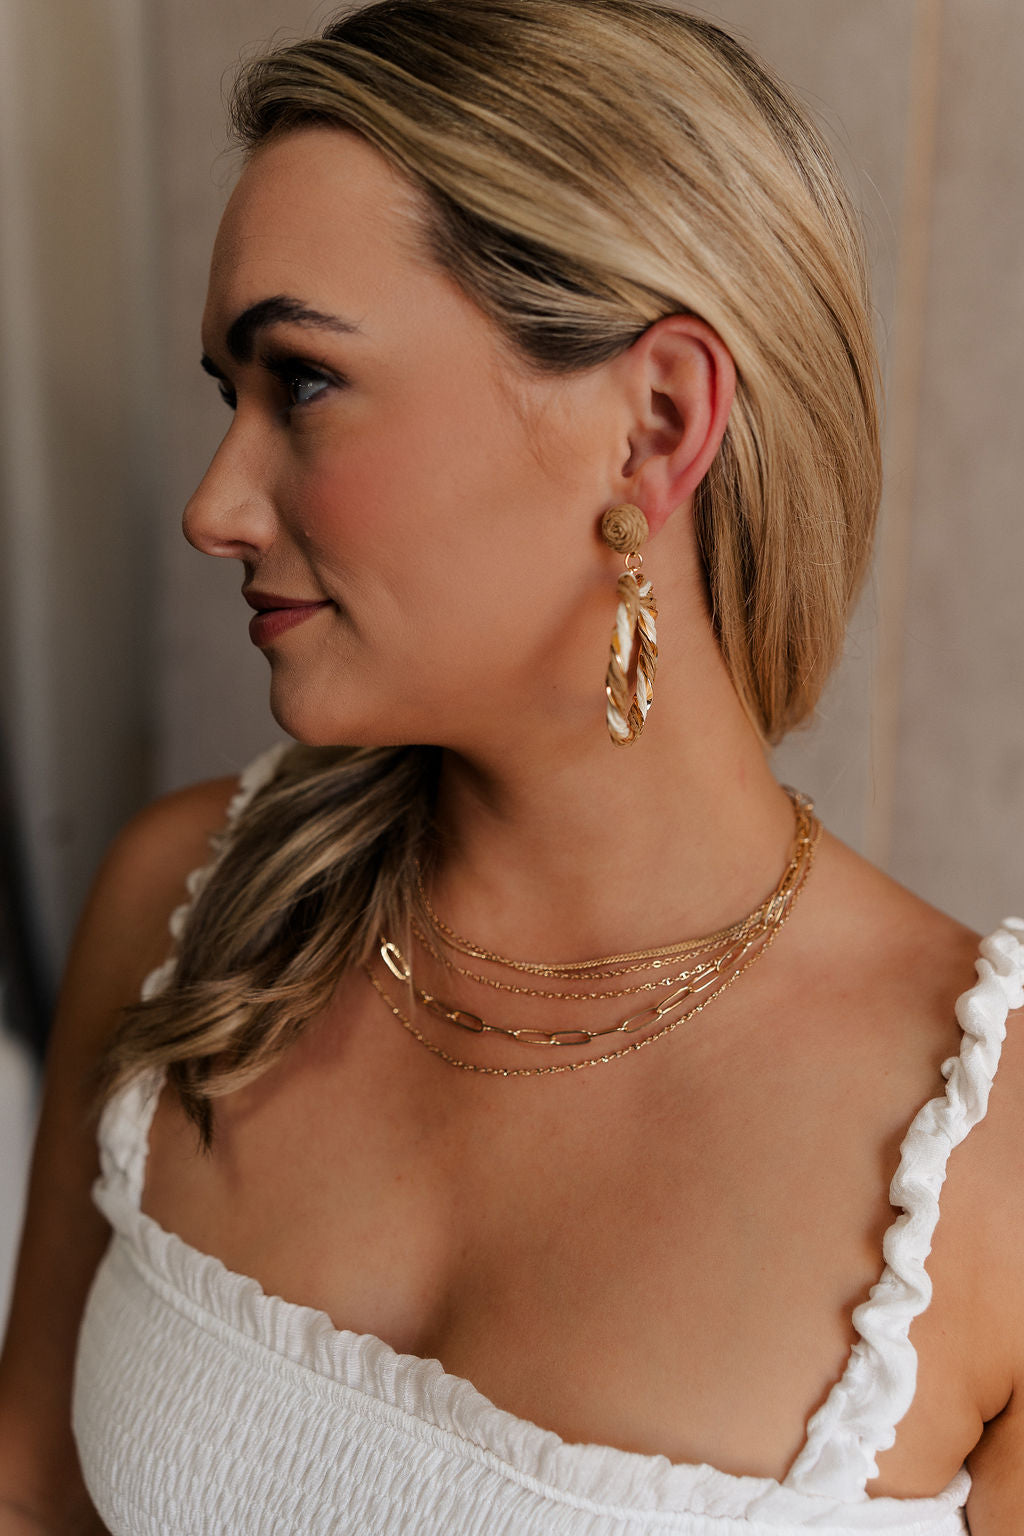 Side view of model's face; model is wearing the Nyomi Raffia & Gold Earrings that have ivory and tan raffia intertwined with gold metal into a circle hanging from tan raffia ball.